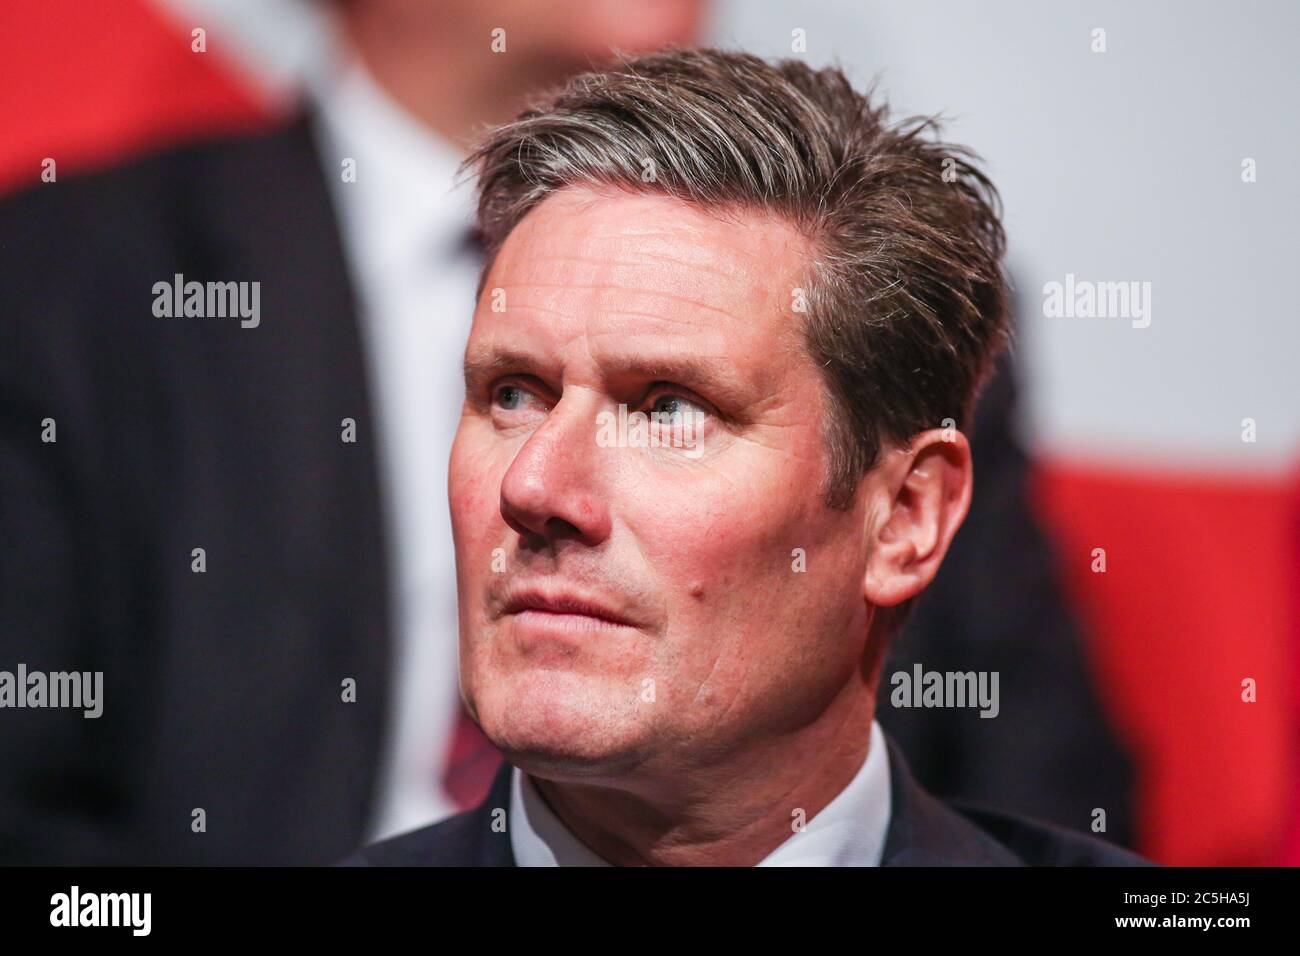 Shadow Brexit Secretary Keir Starmer watches on as Labour Leader Jeremy Corbyn addresses supporters and the media at a rally in Manchester to launch t Stock Photo